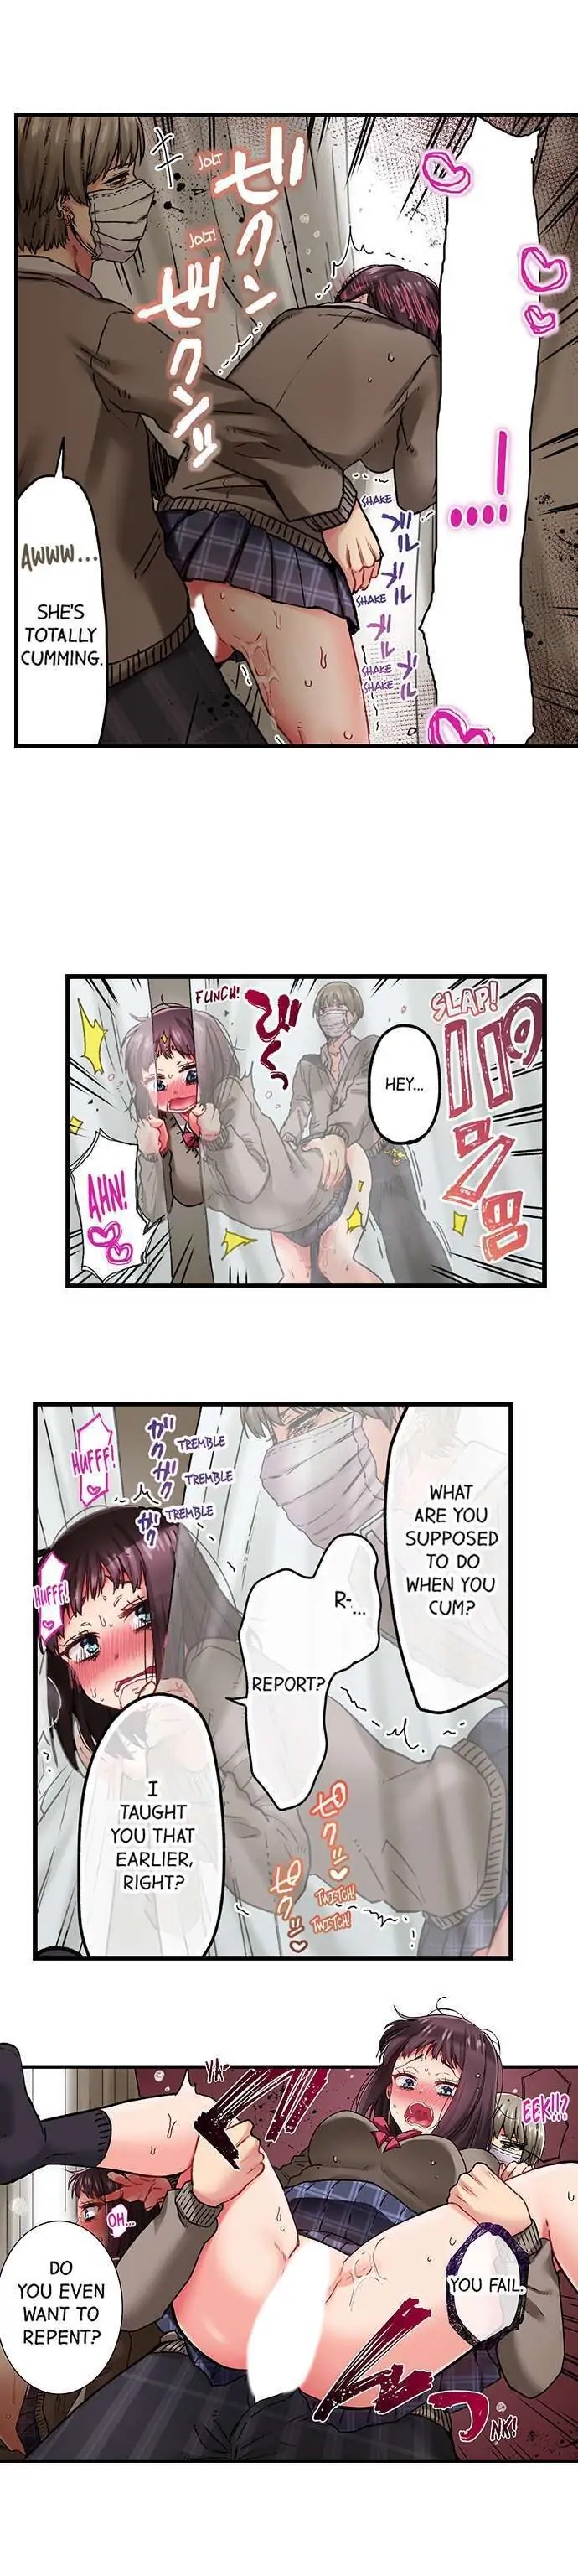 Cumming 100 Times To Protect My Crush - Chapter 21 Page 6